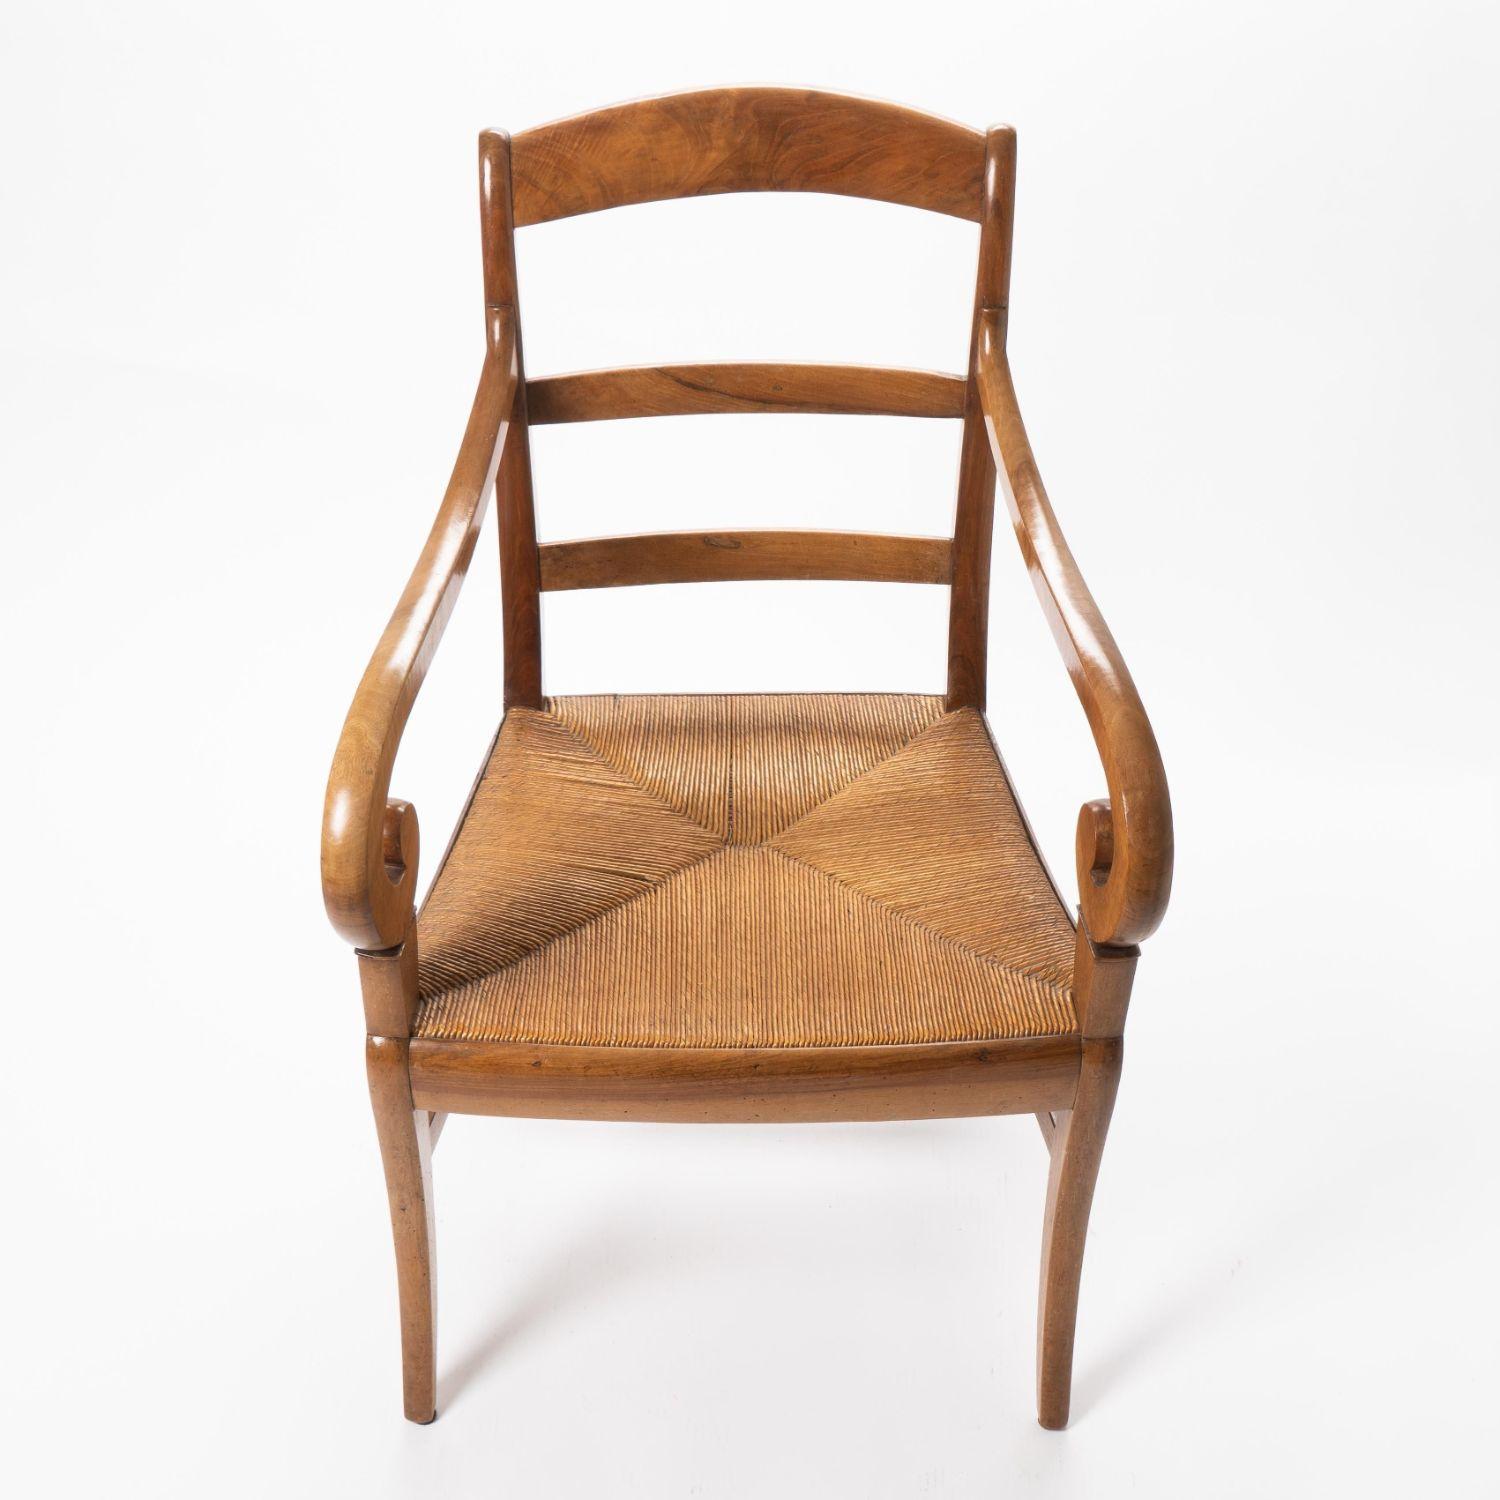 French Cherry Wood Arm Chair with Rush Seat and Upholstered Cushion, c. 1830 For Sale 1